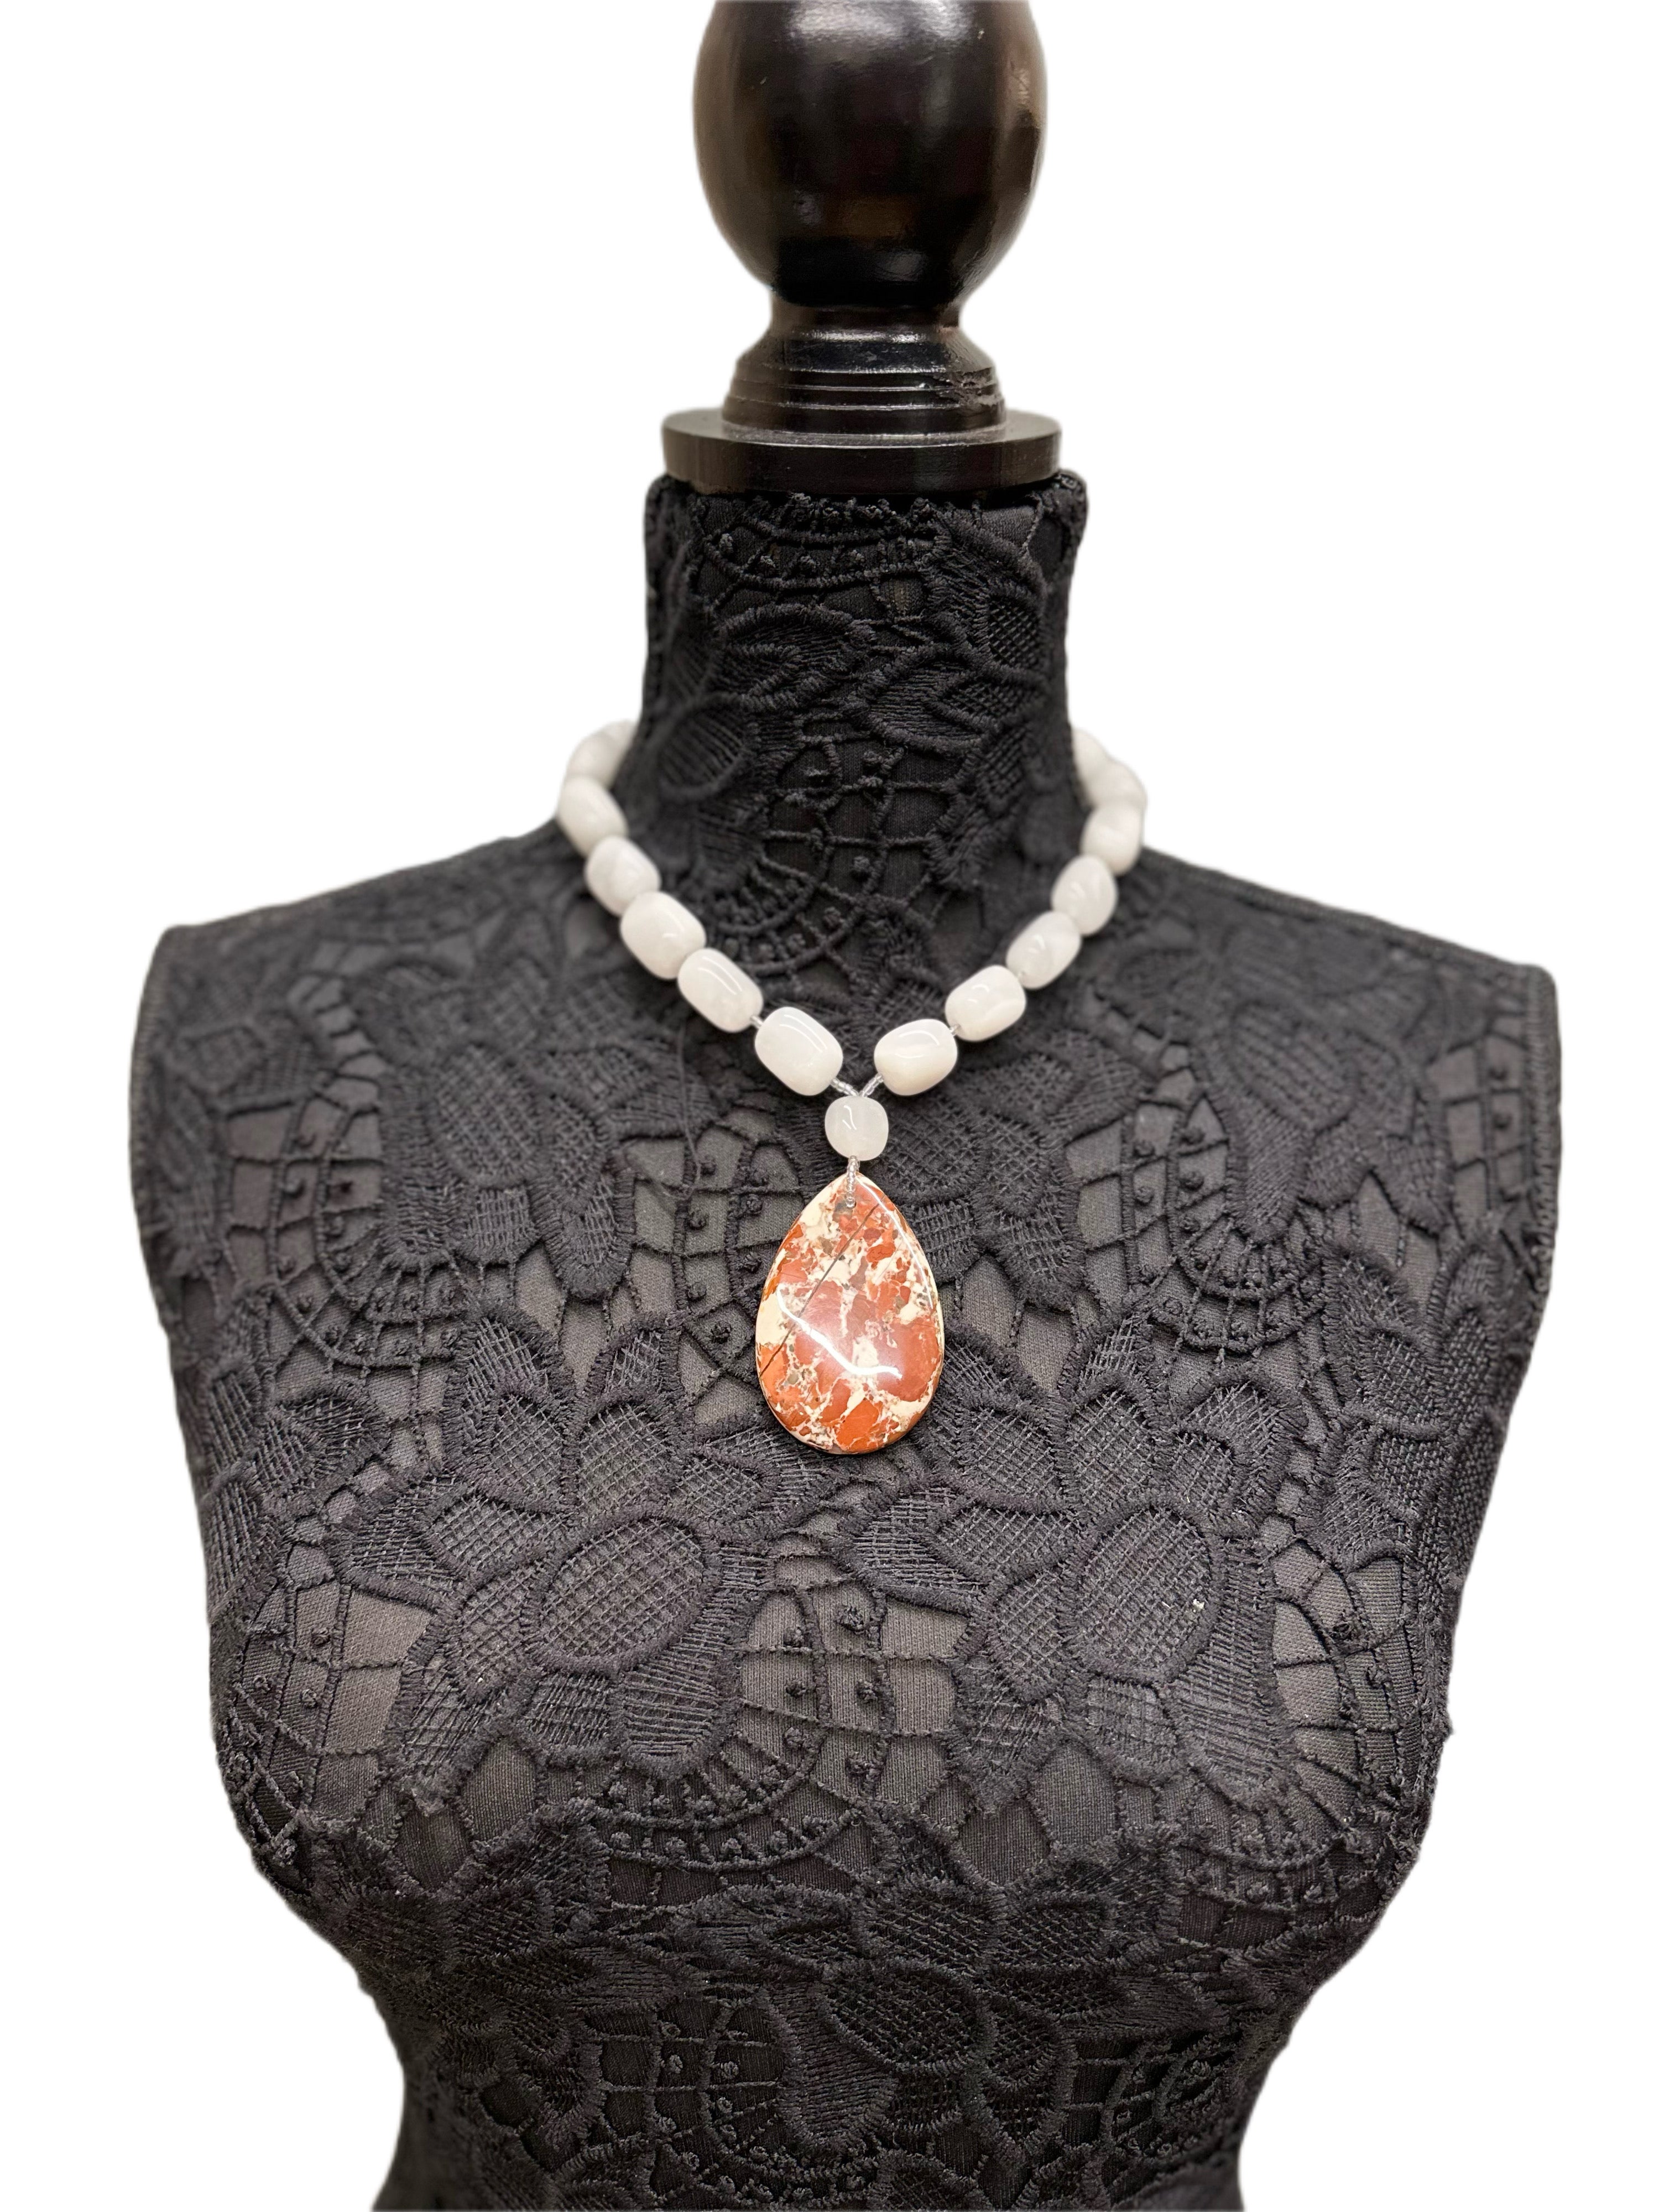 White Agate Handmade Necklace with Stone pendant